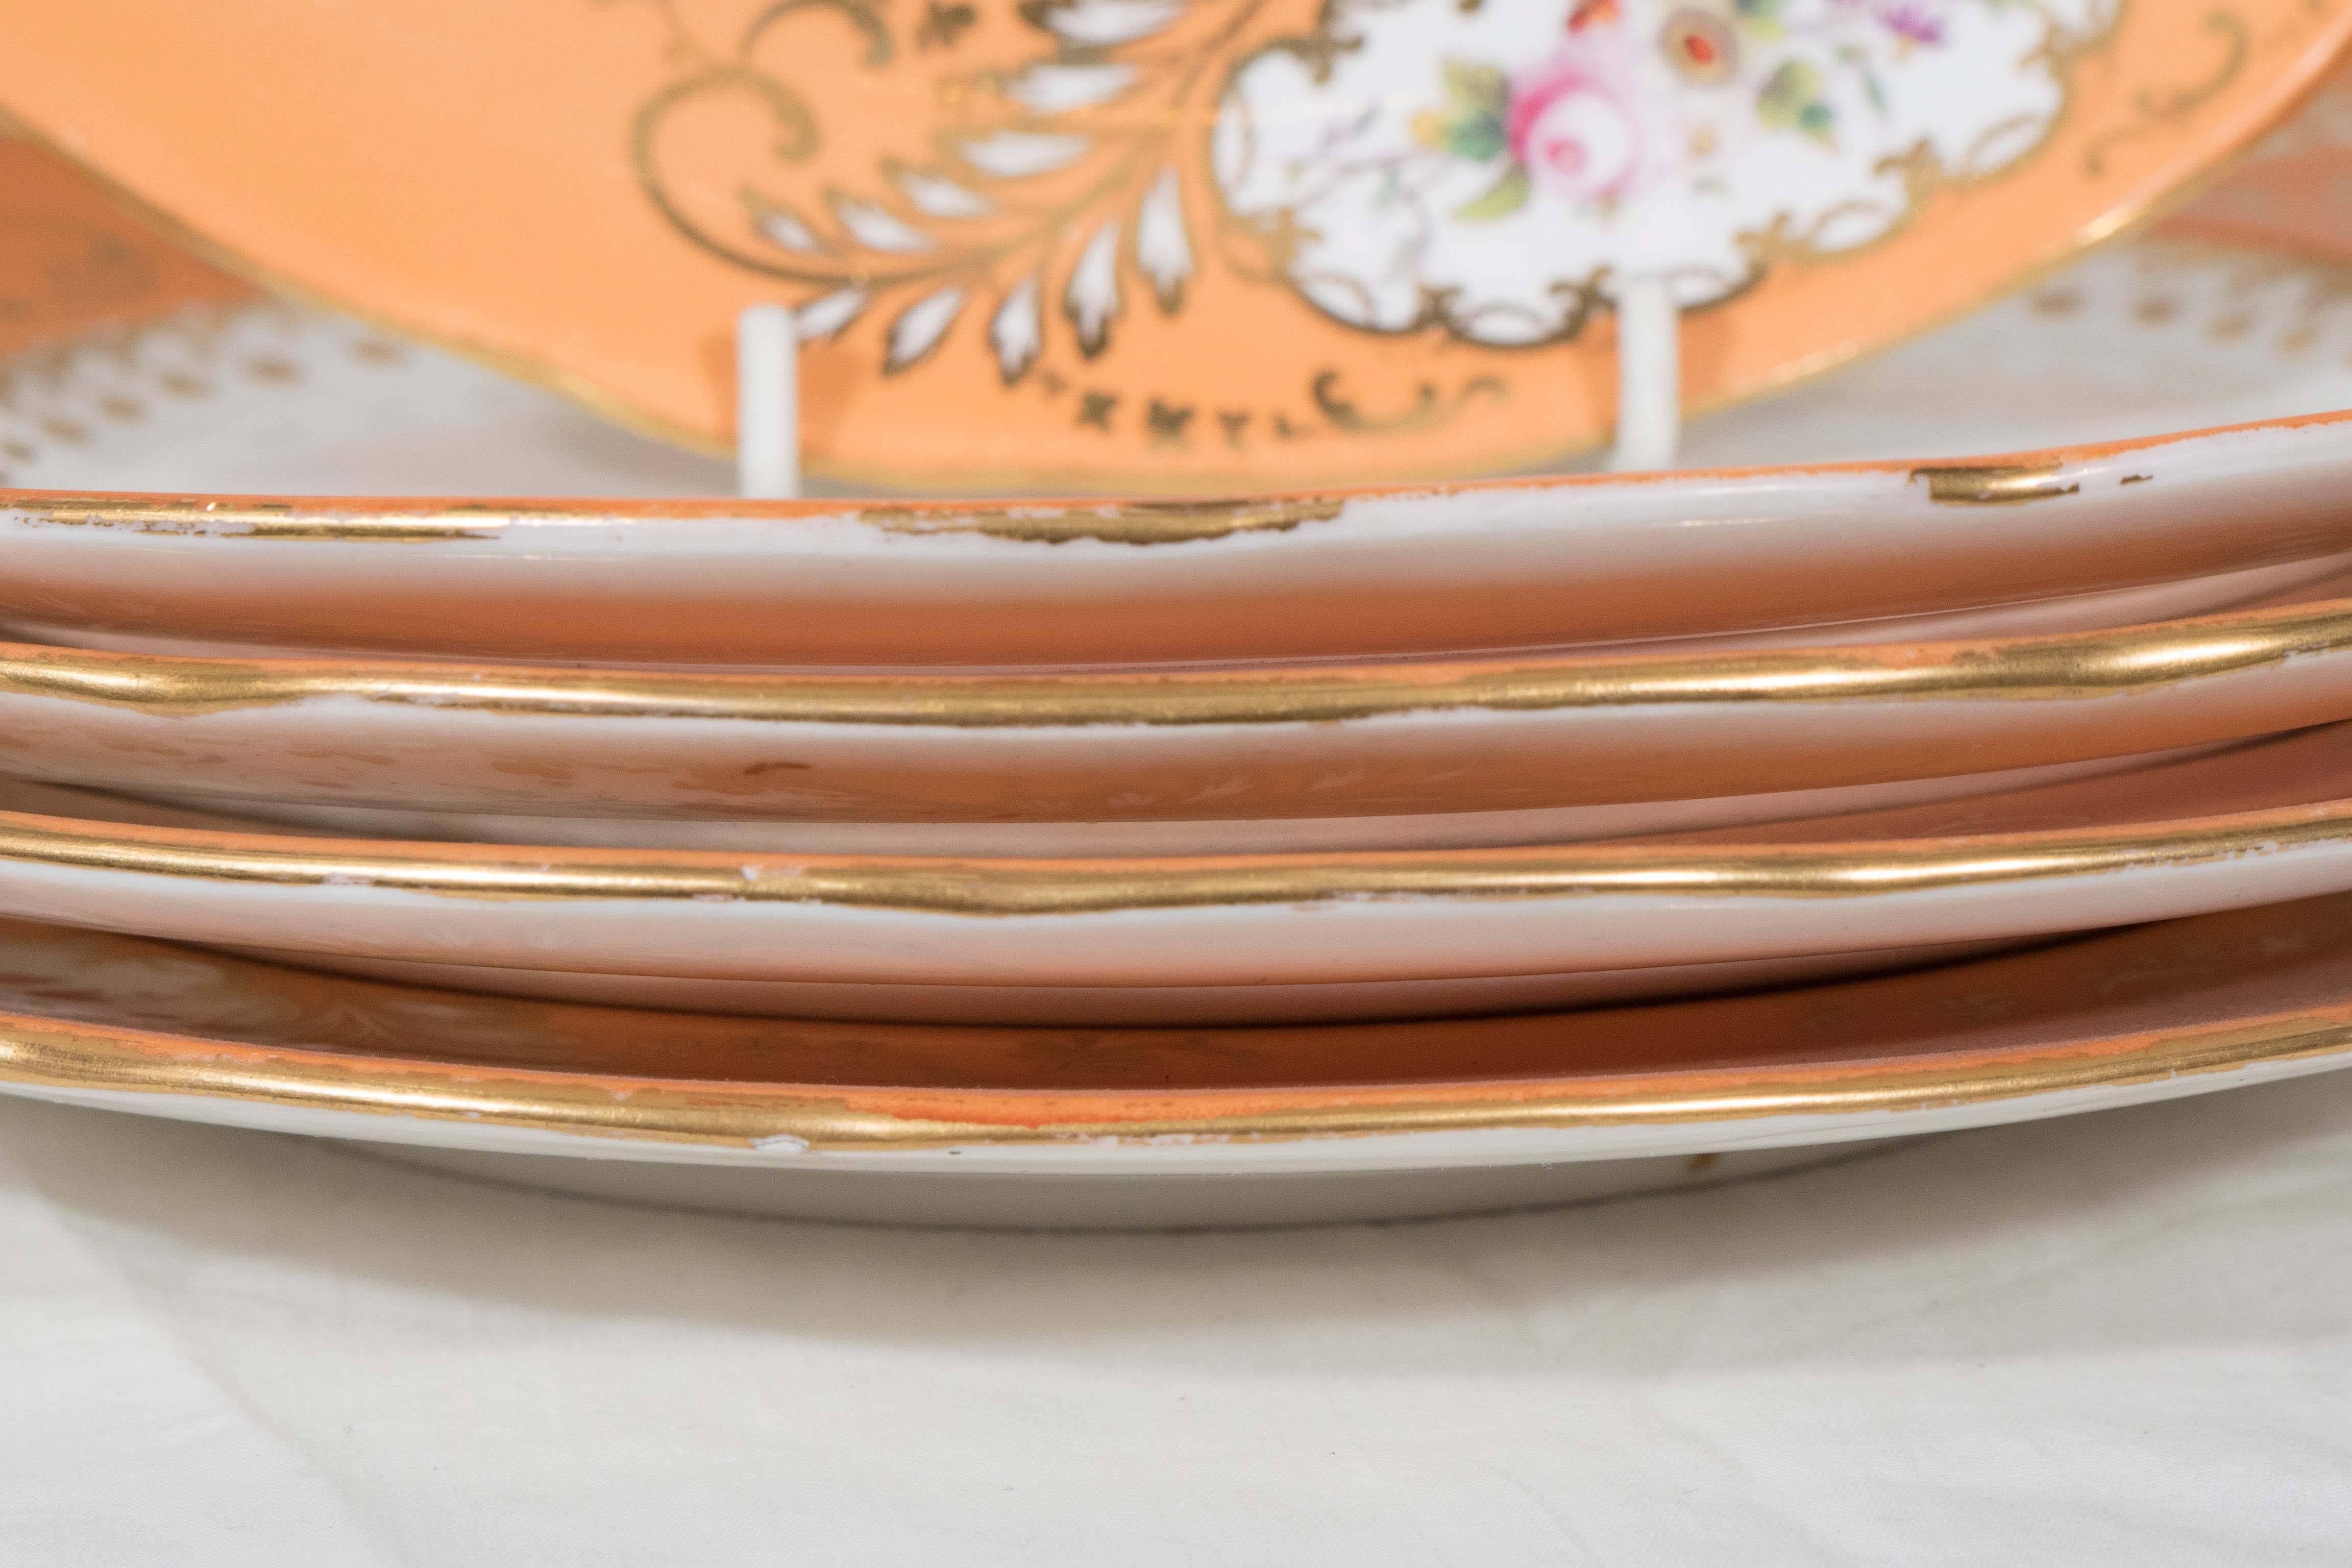 Antique English Porcelain Dishes with Wide Orange Borders 1